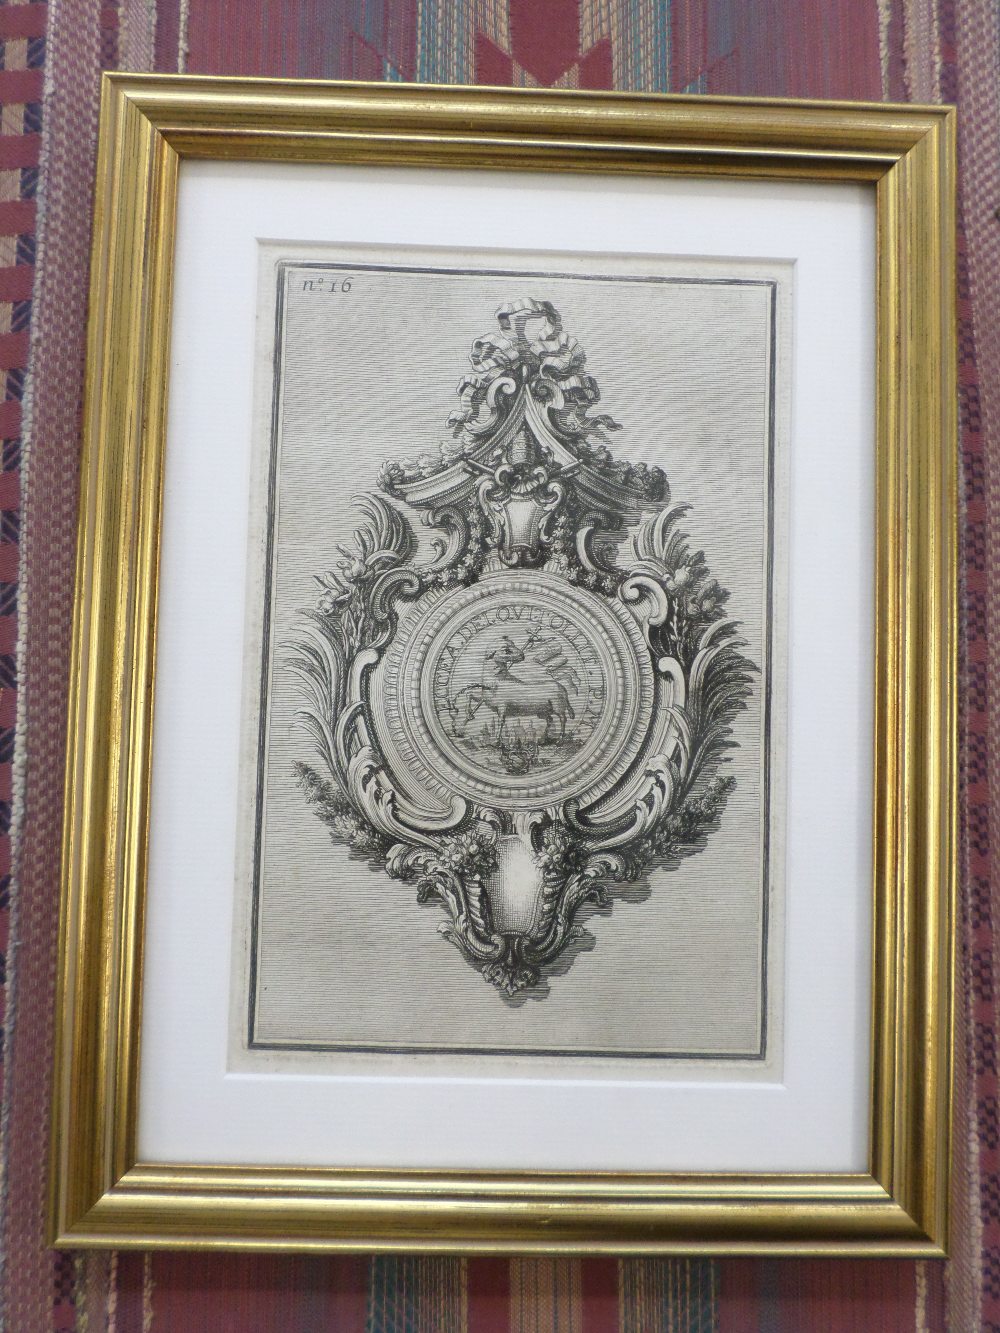 Framed and glazed print of illustration from 19th century French publication